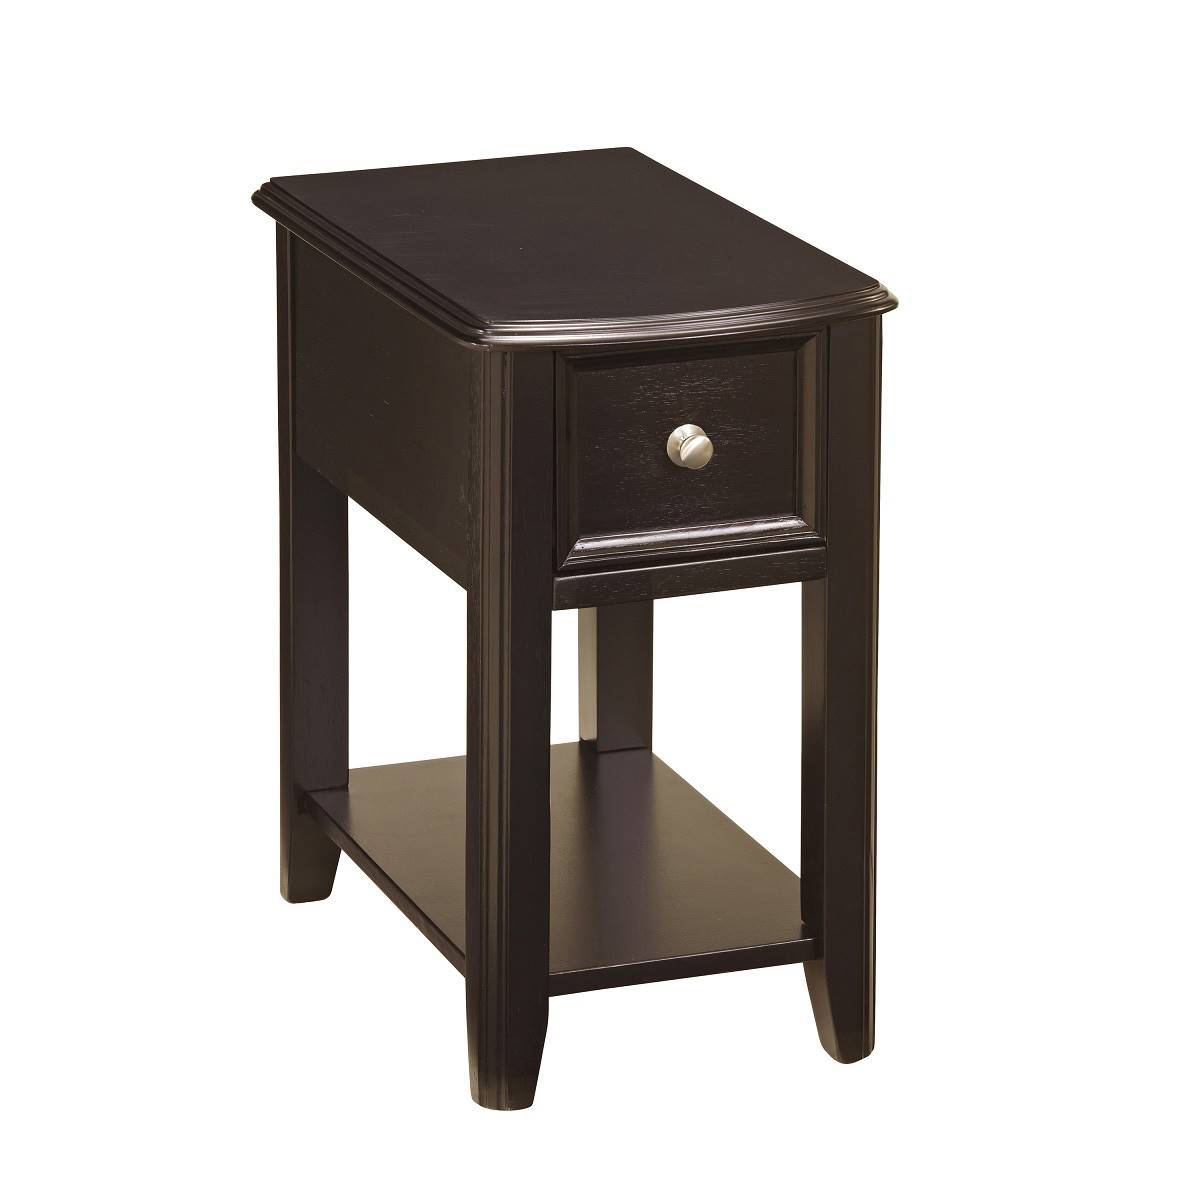 Signature Design By Ashley Breegin Chairside End Table